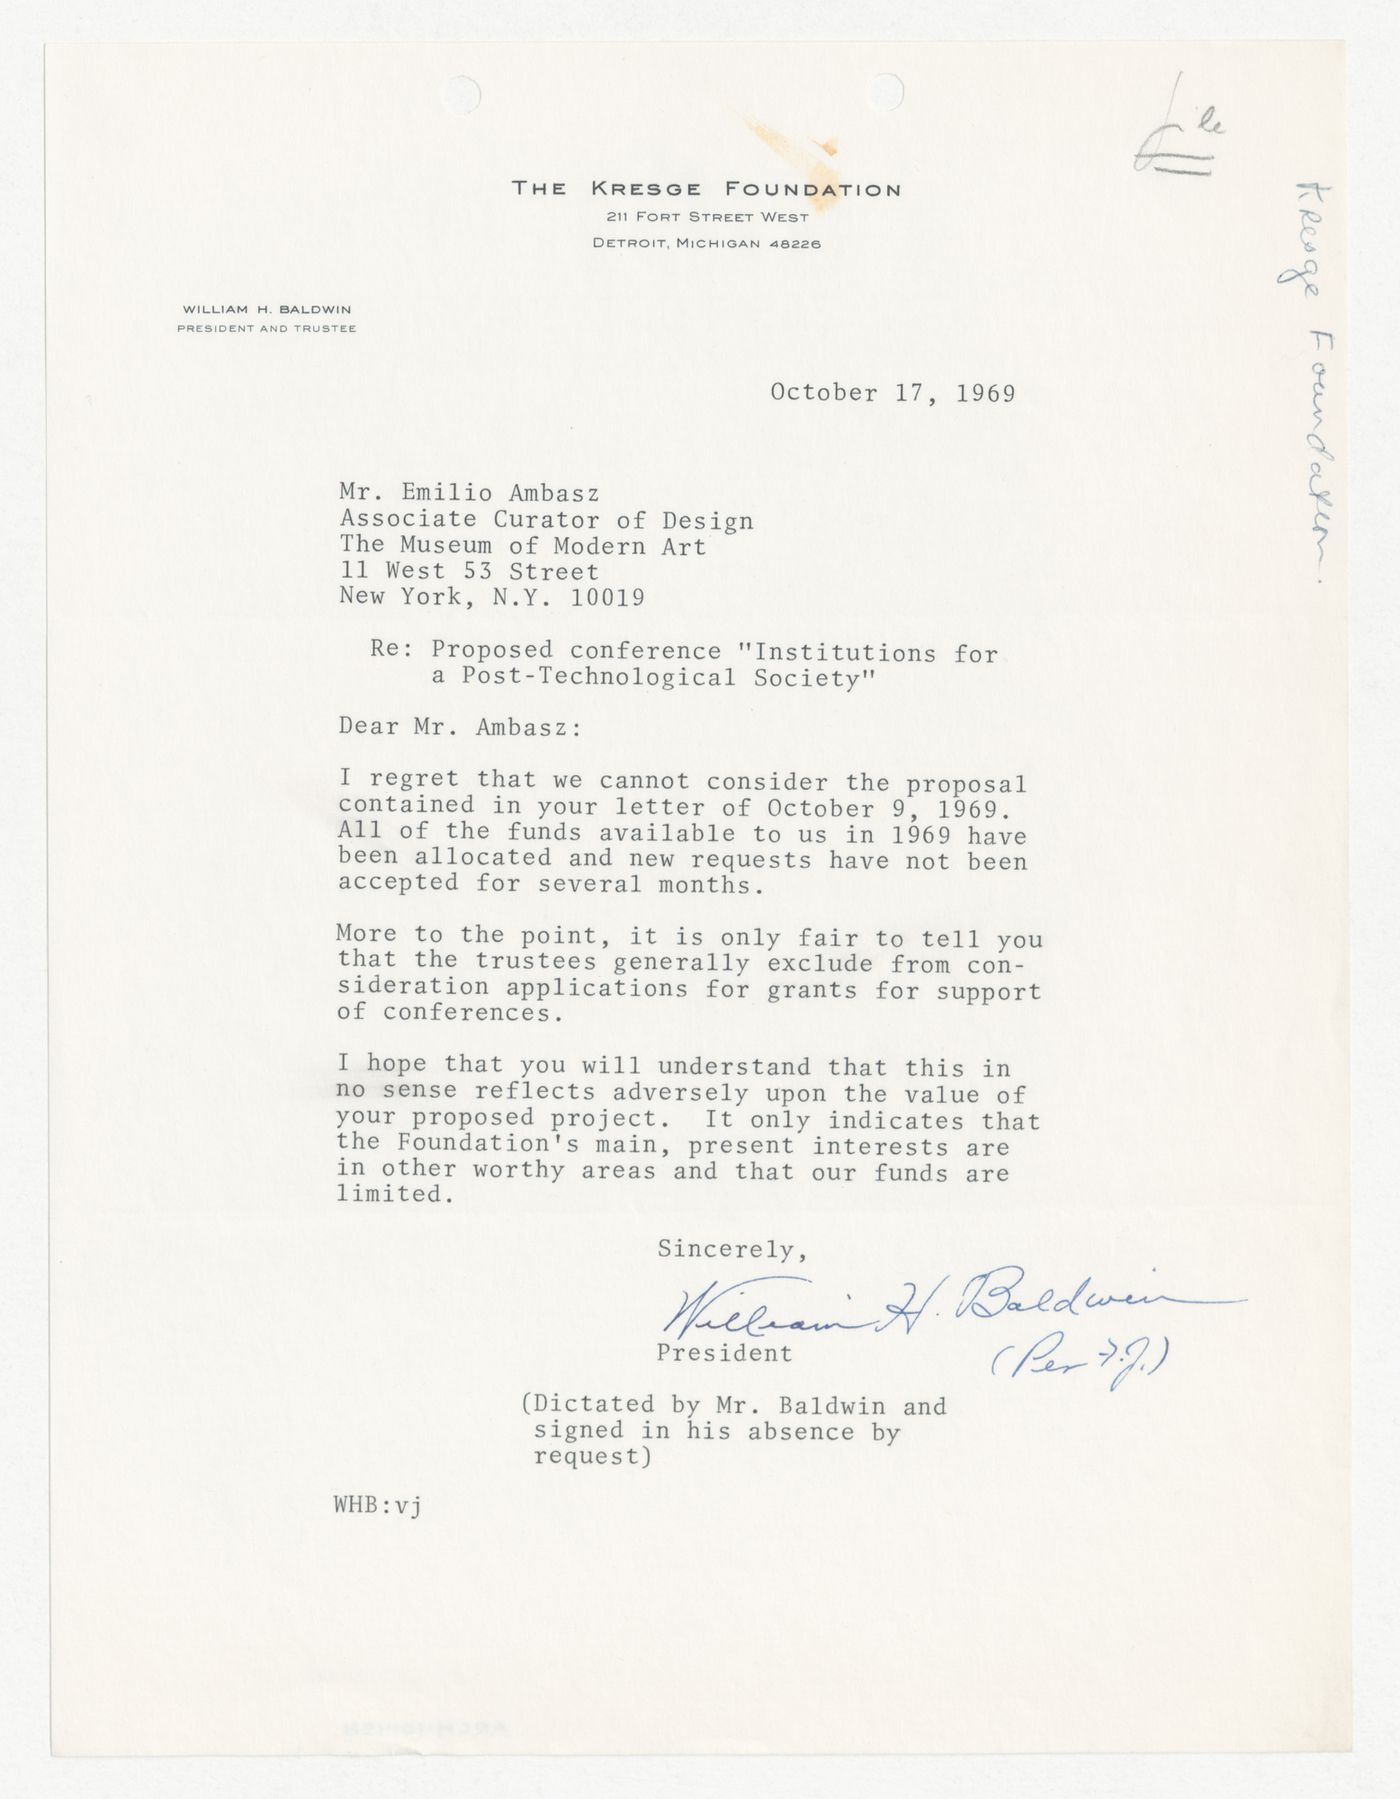 Letter from William H. Baldwin to Emilio Ambasz responding to proposal for Institutions for a Post-Technological Society conference